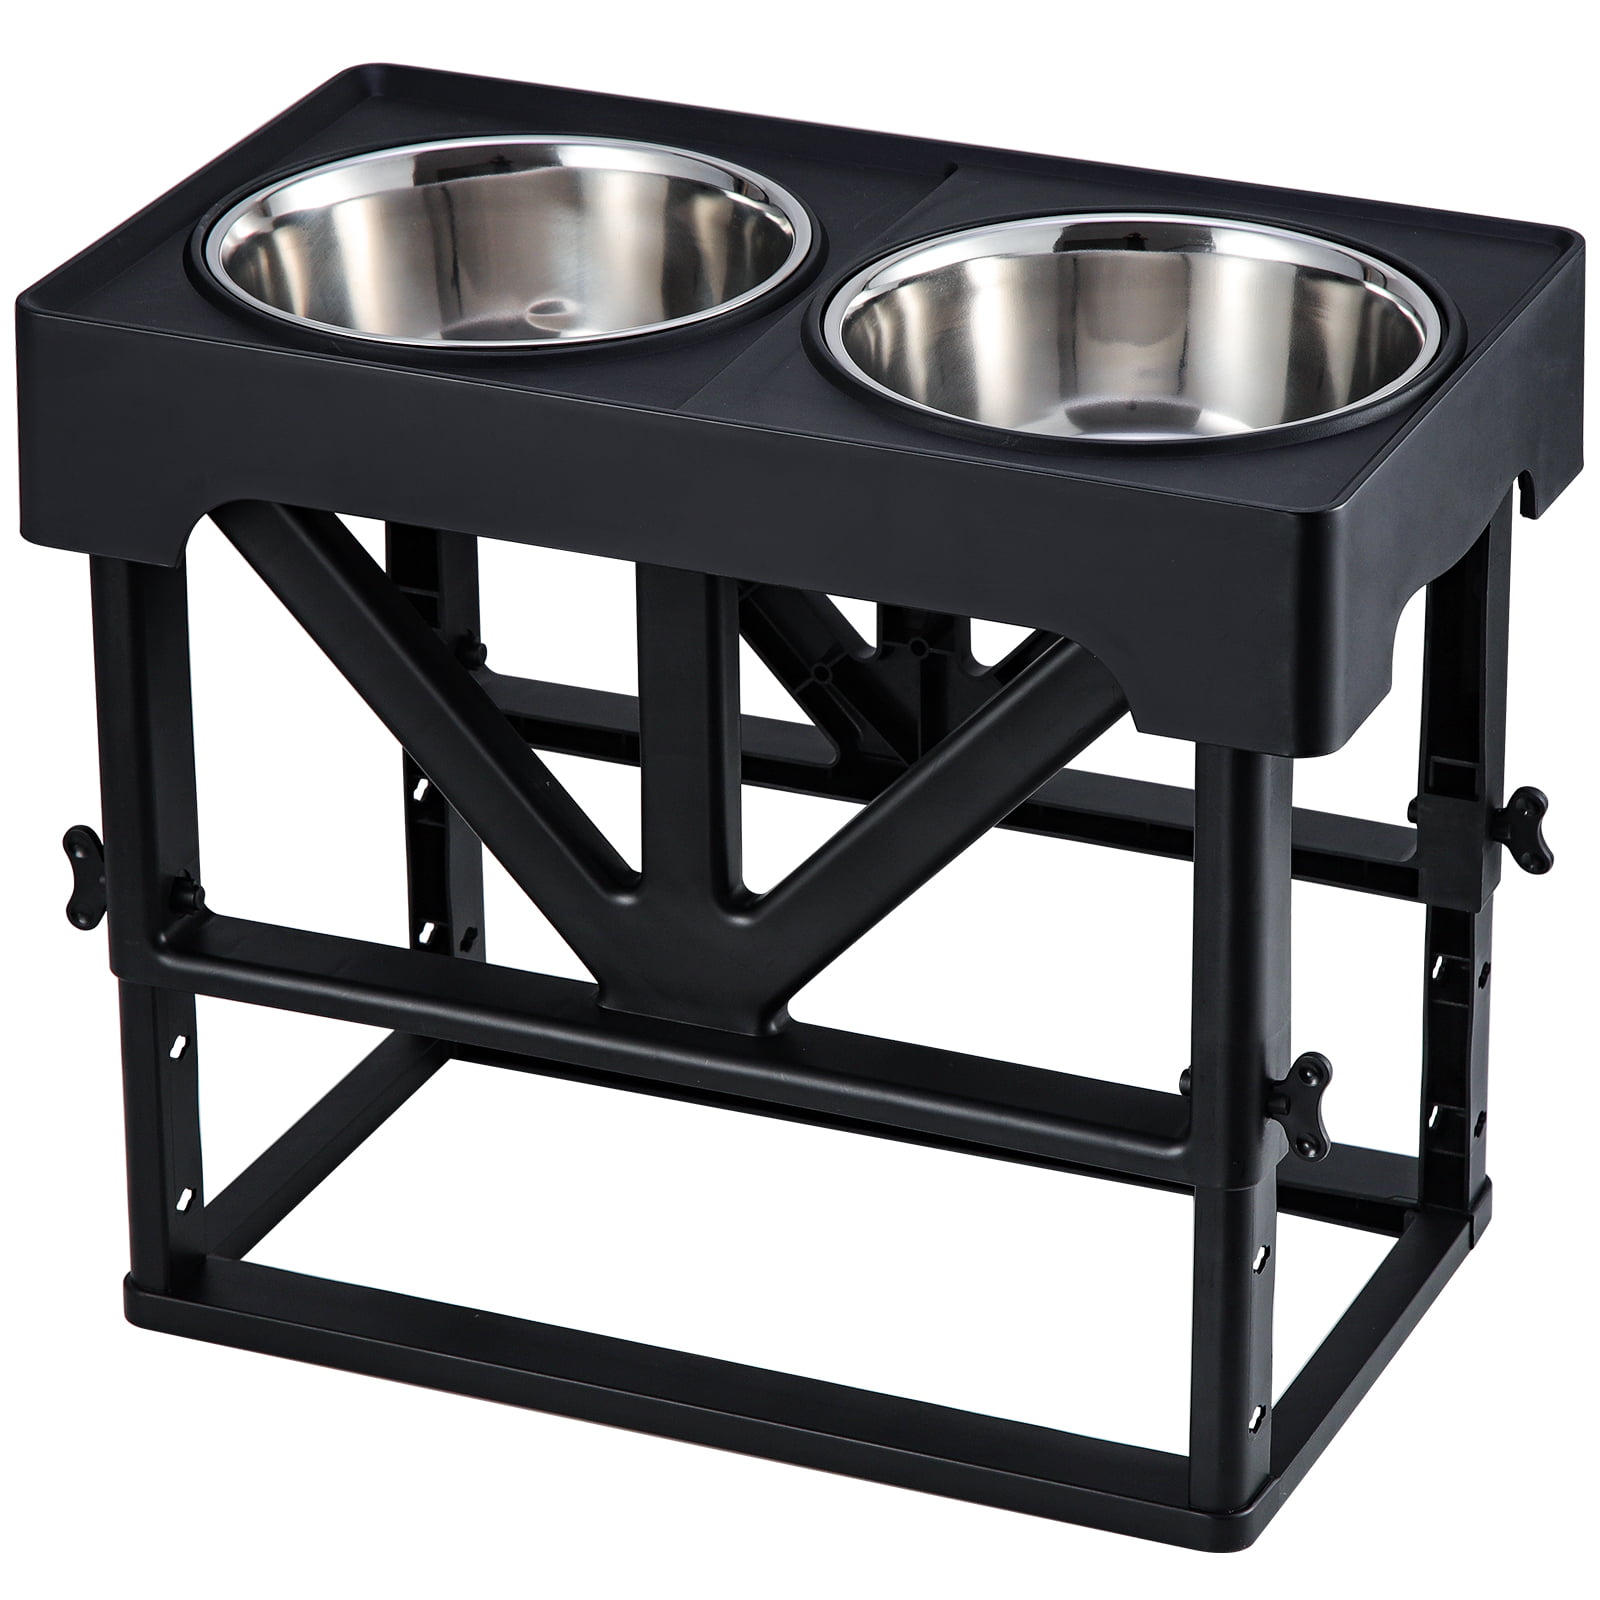 Dazone Dogs Elevated Feeder & Reviews